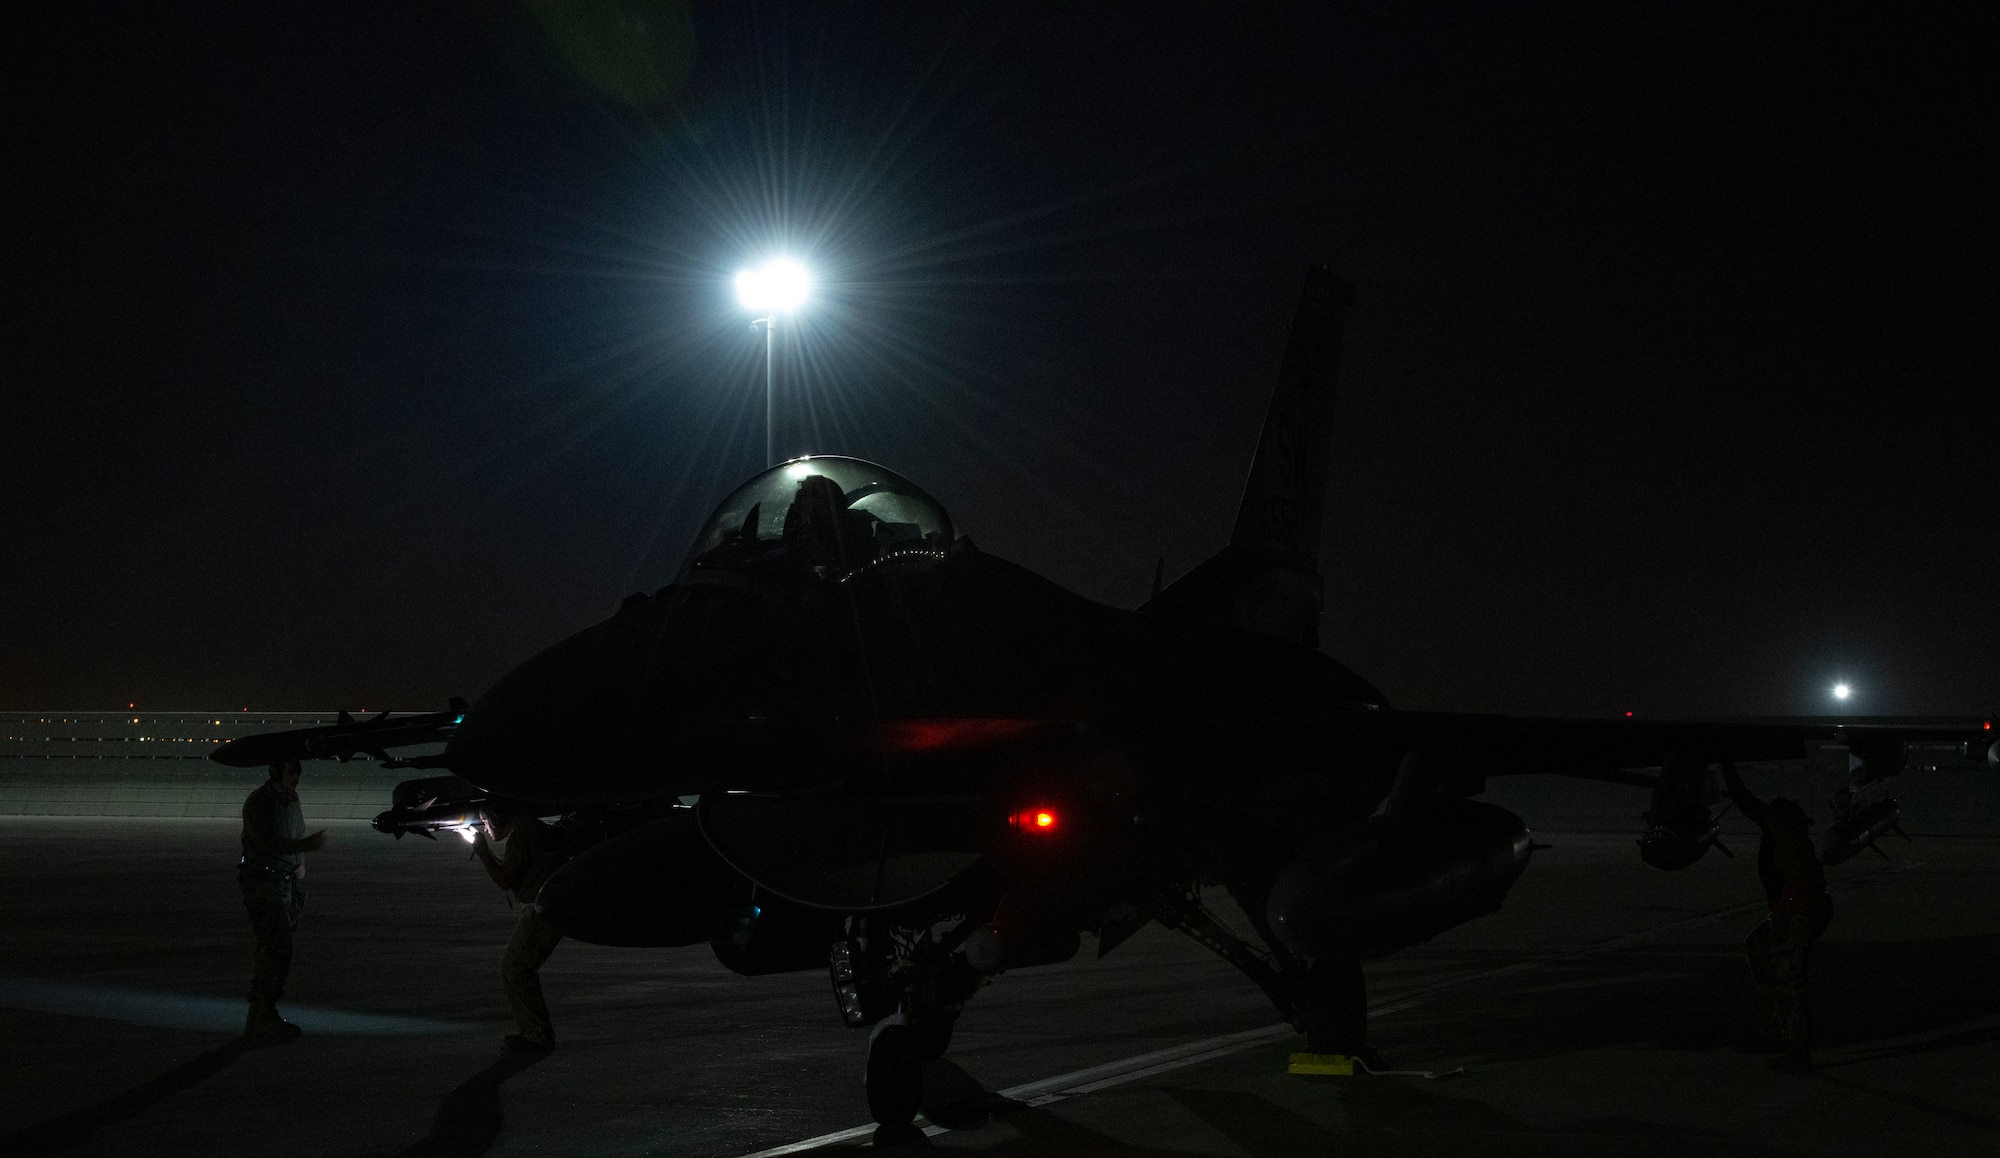 Military jet sits on a flight line at night.